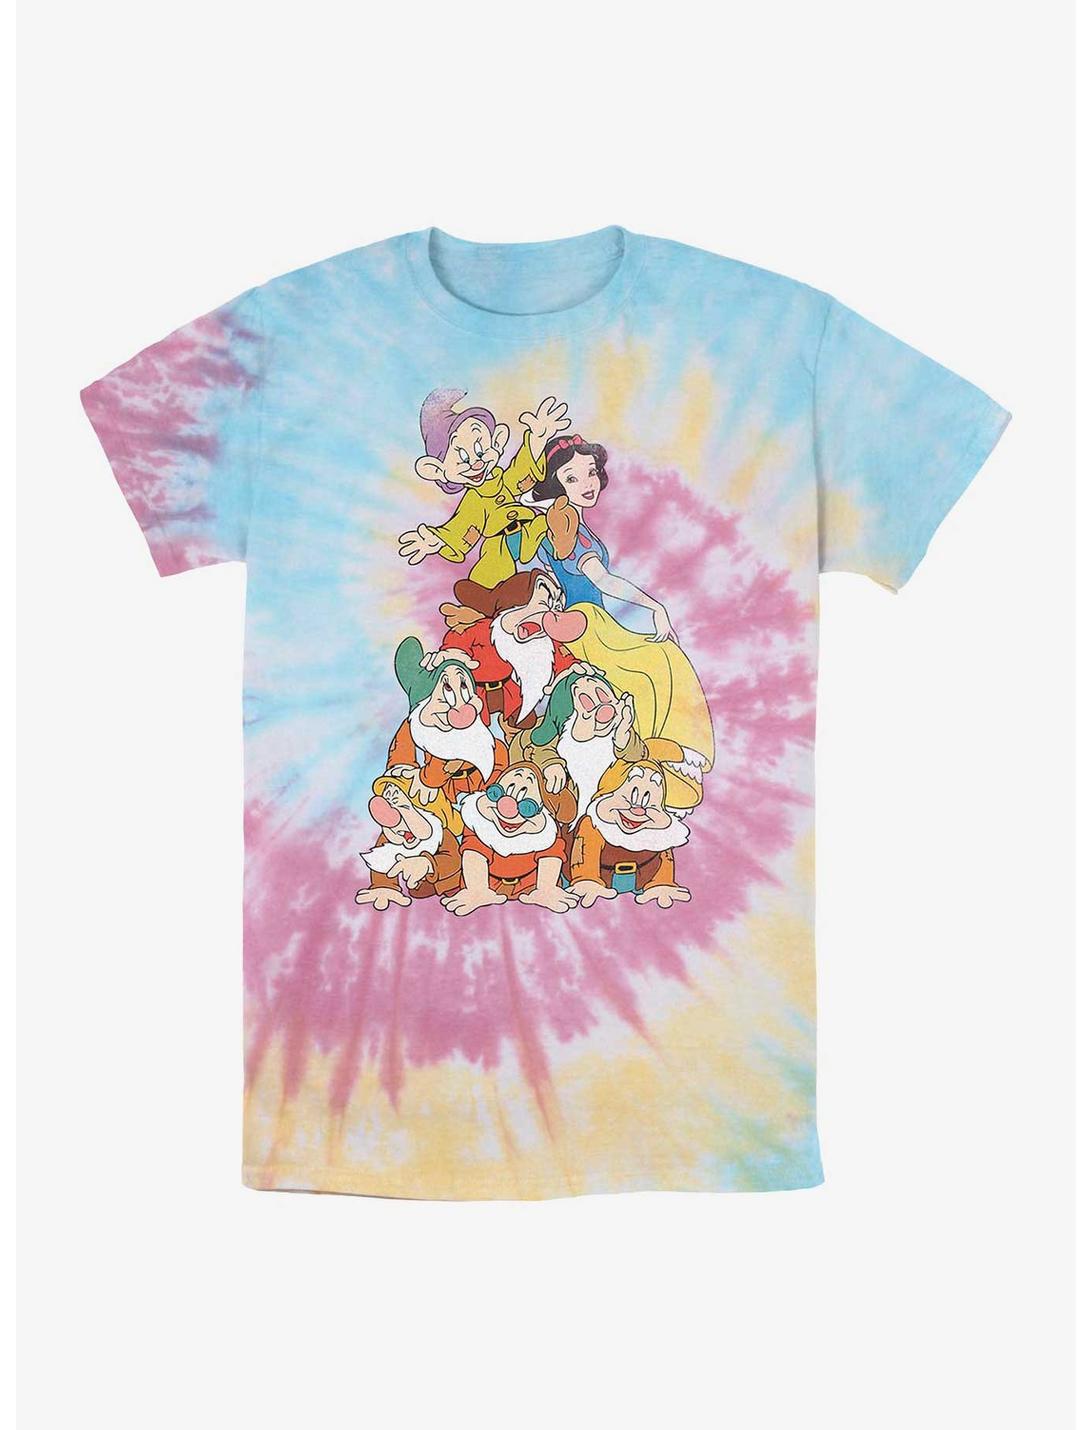 Disney Snow White And The Seven Dwarfs Pyramid Stack Tie-Dye T-Shirt, BLUPNKLY, hi-res